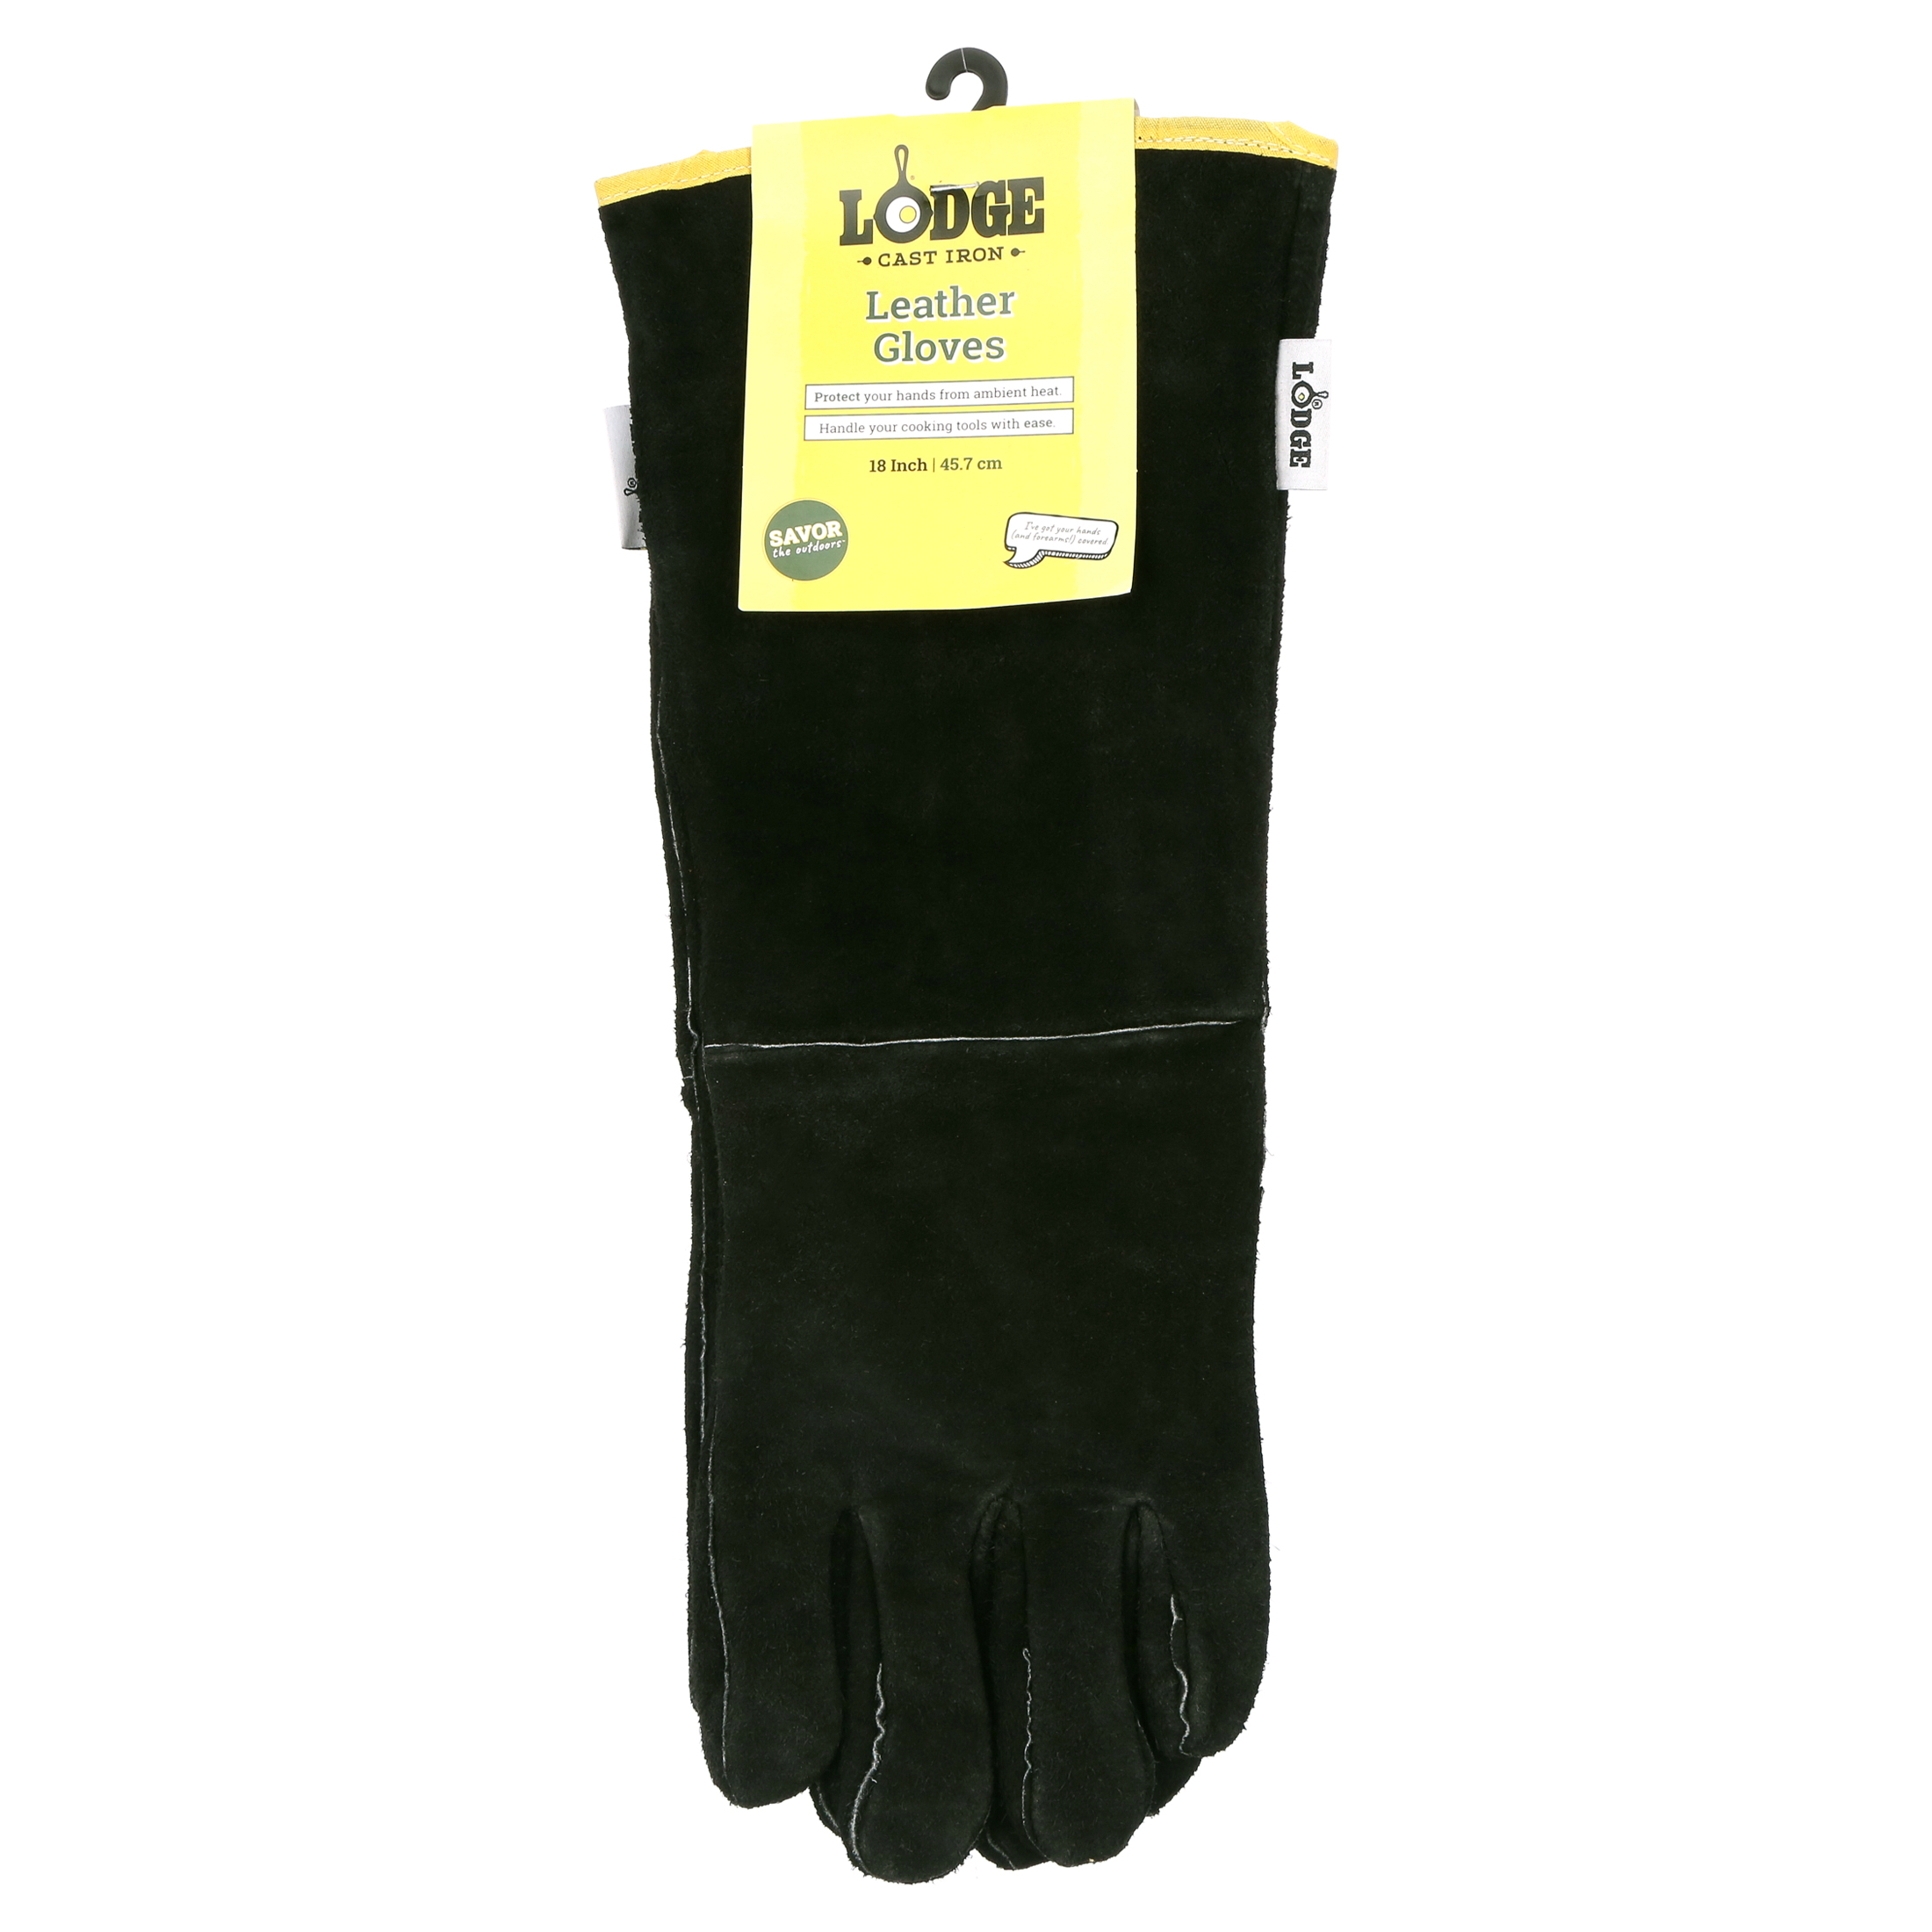 Lodge Cast Iron Logic Leather Gloves A5-2 - image 2 of 6